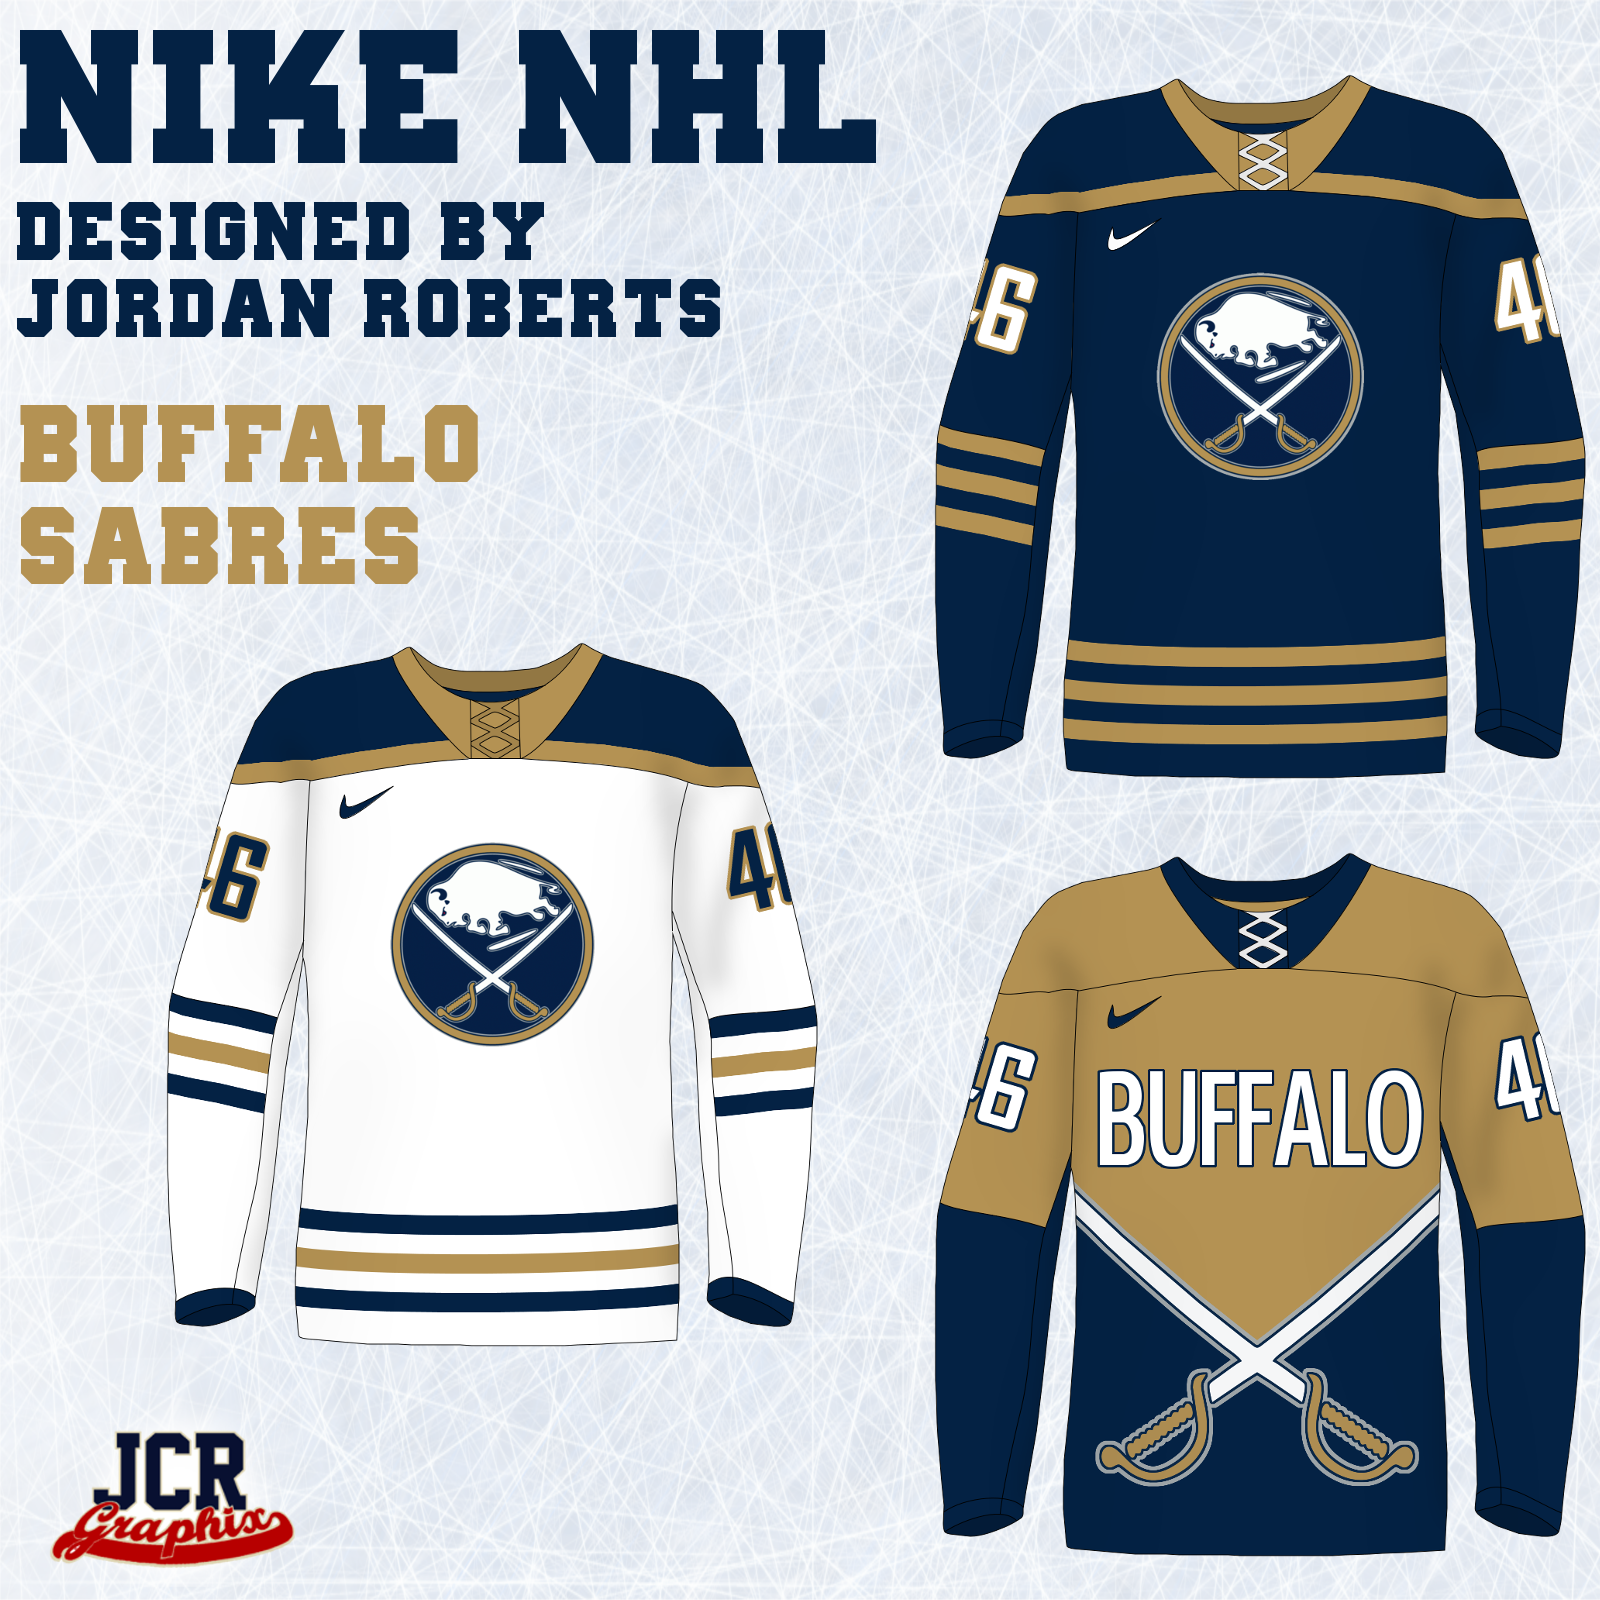 NHL Nike Jerseys - Wild and Blue added - Page 2 - Concepts - Chris Sports Logos Community - CCSLC - SportsLogos.Net